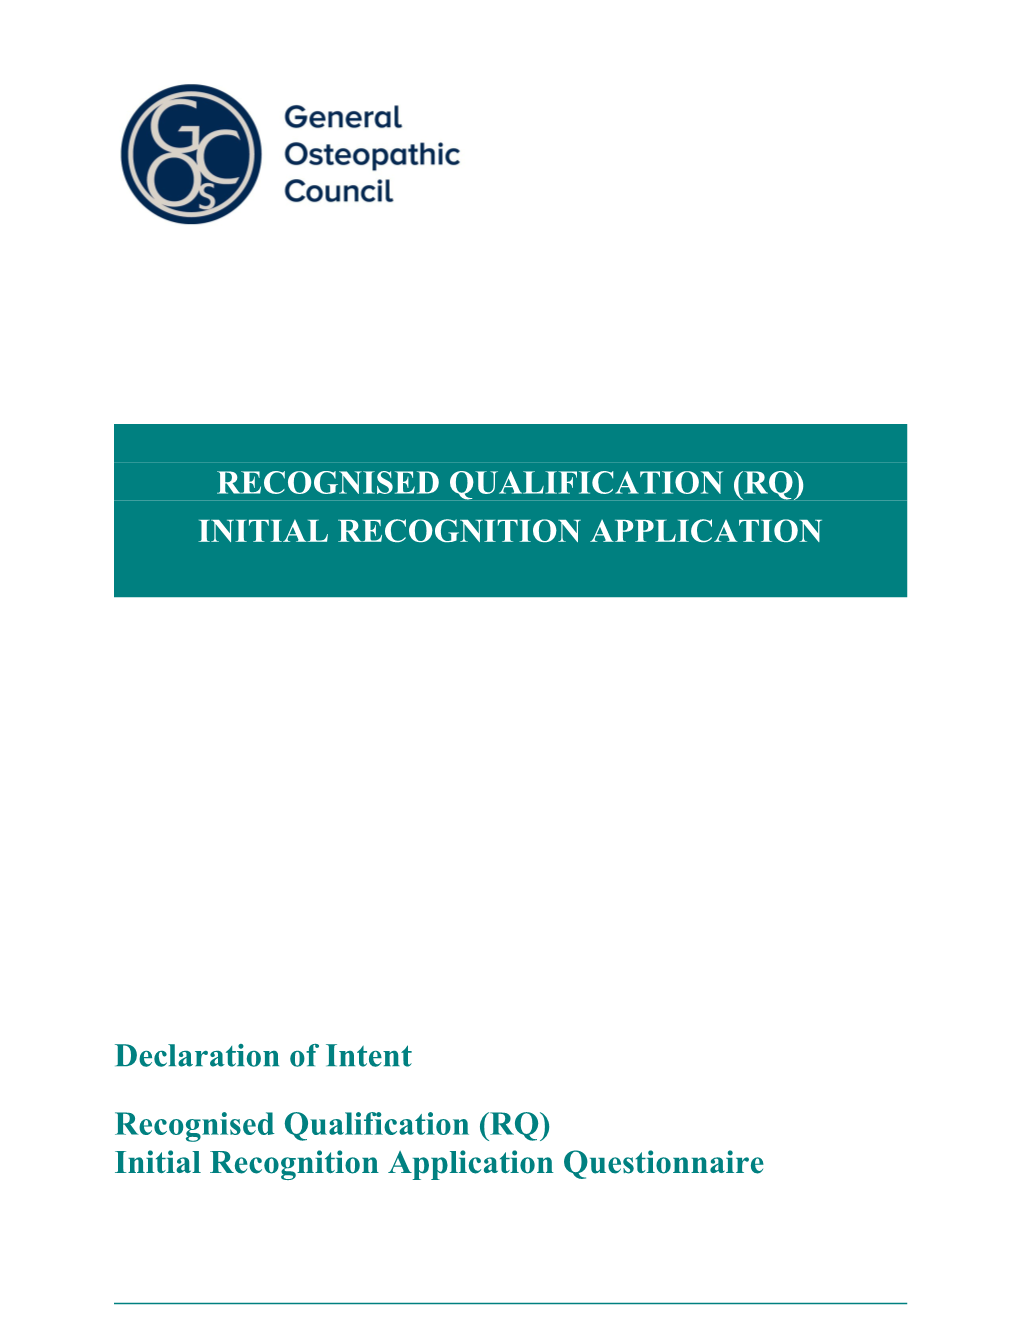 Initial Recognition RQ Application Form